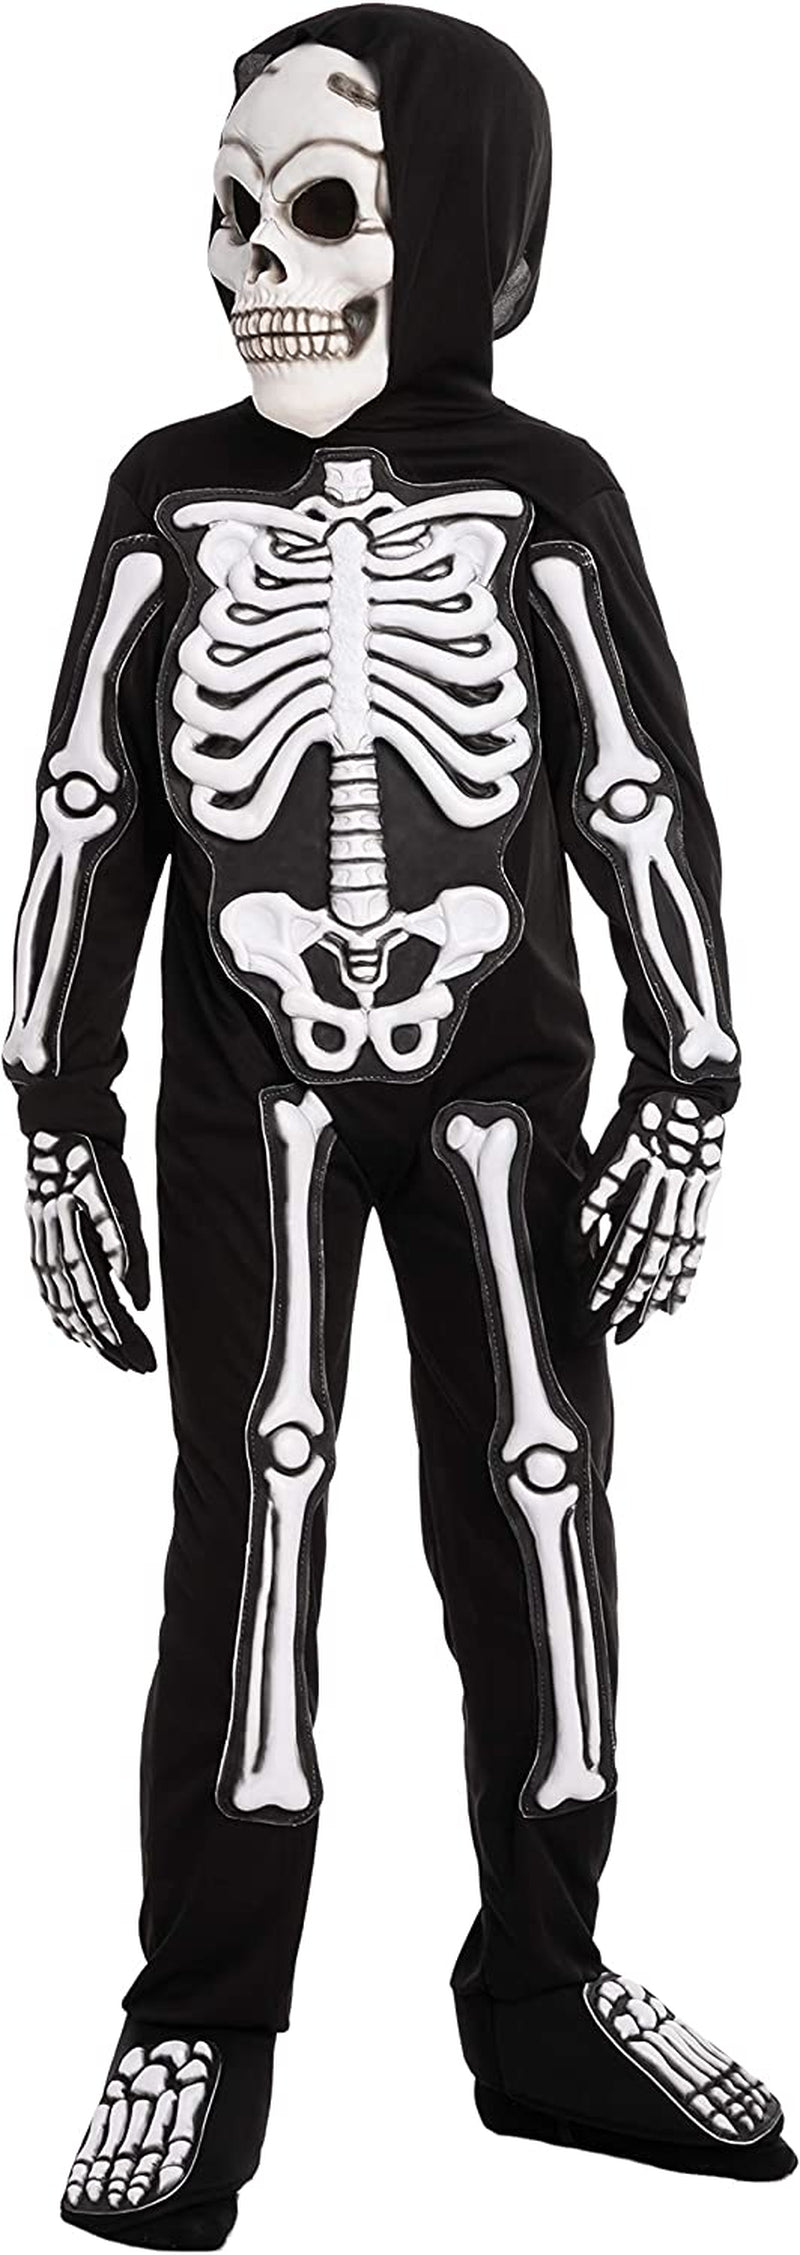 Spooktacular Creations Fierce 3D Skeleton Costume Set for Kids Halloween Dress Up, Role-Play, Carnival Cosplay